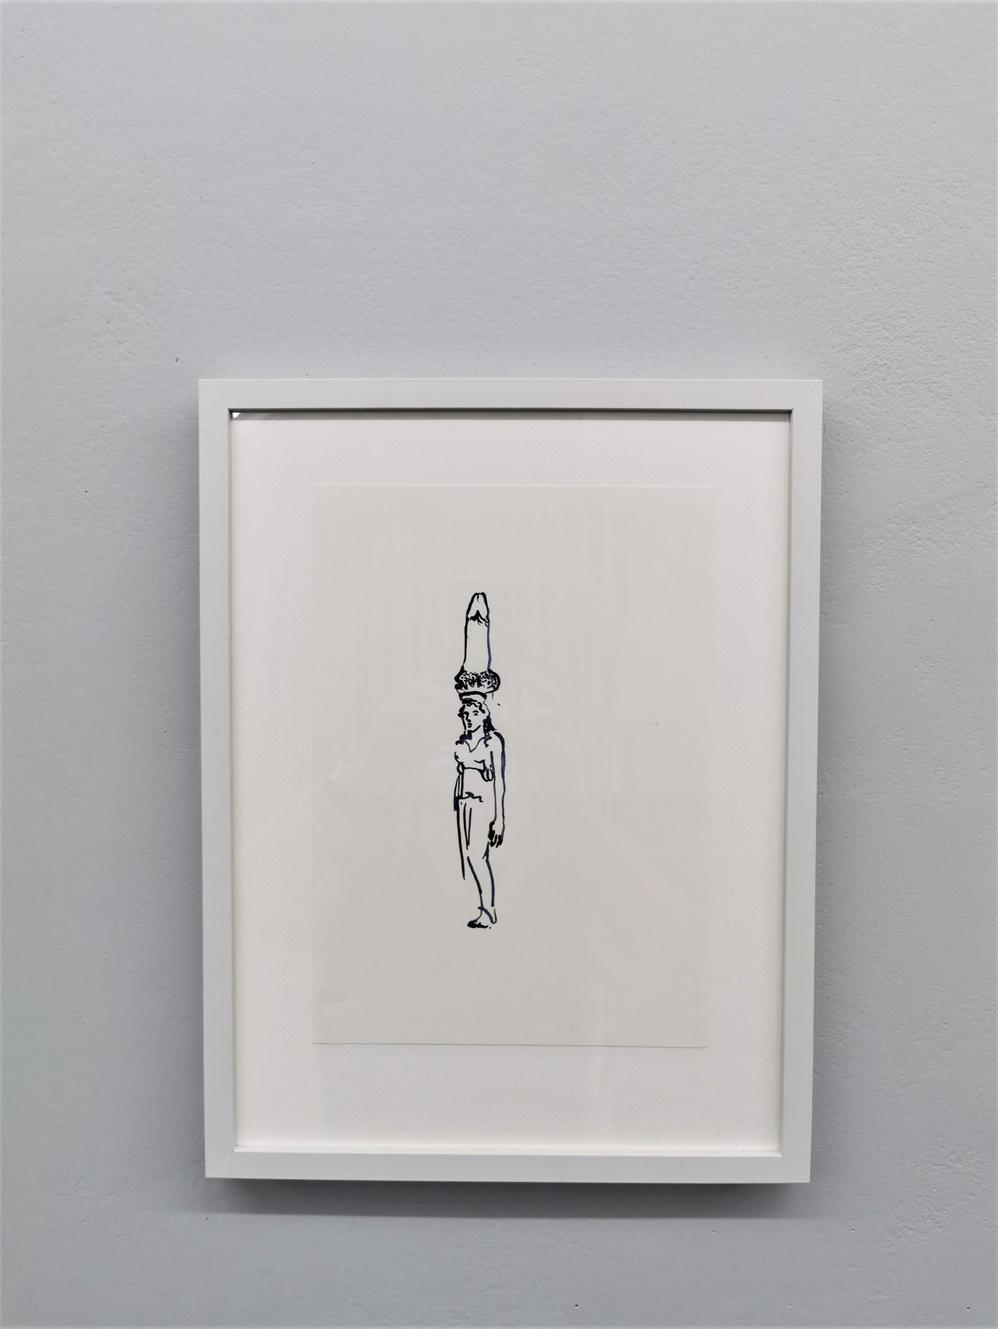 Exhibition view, drawing 01